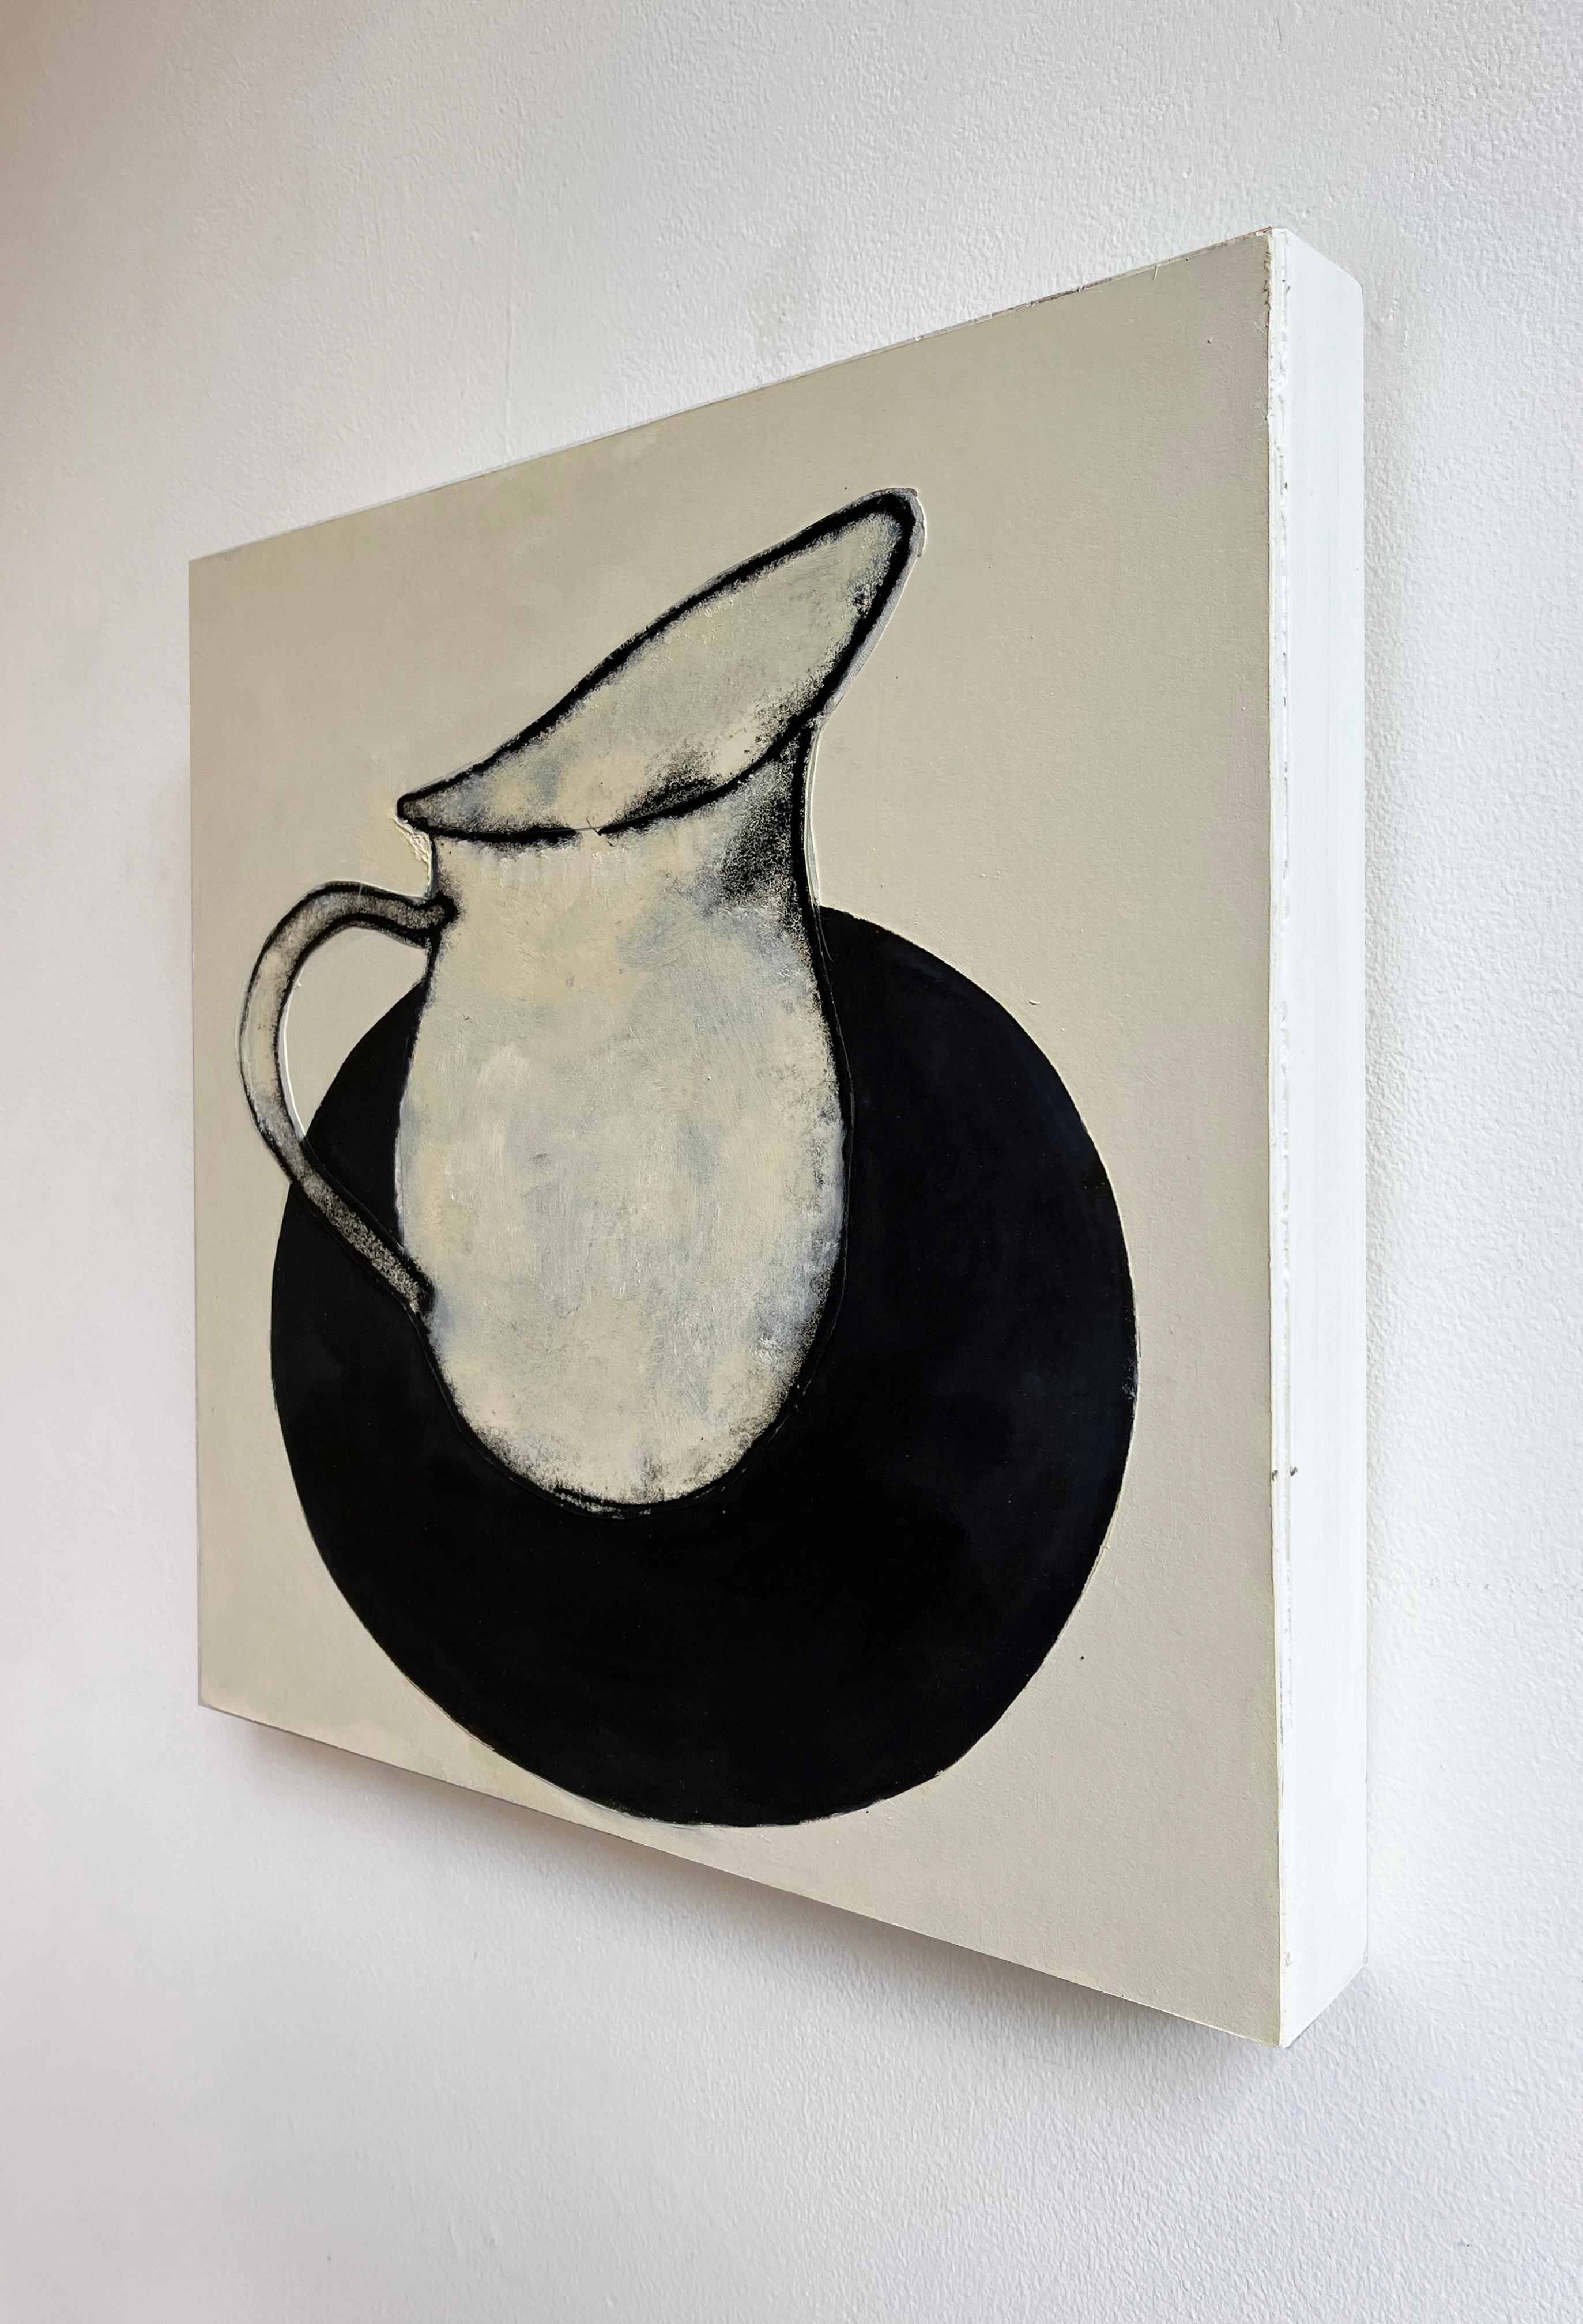 Pitcher (Contemporary Graphic Black & White Still Life Collage) For Sale 1